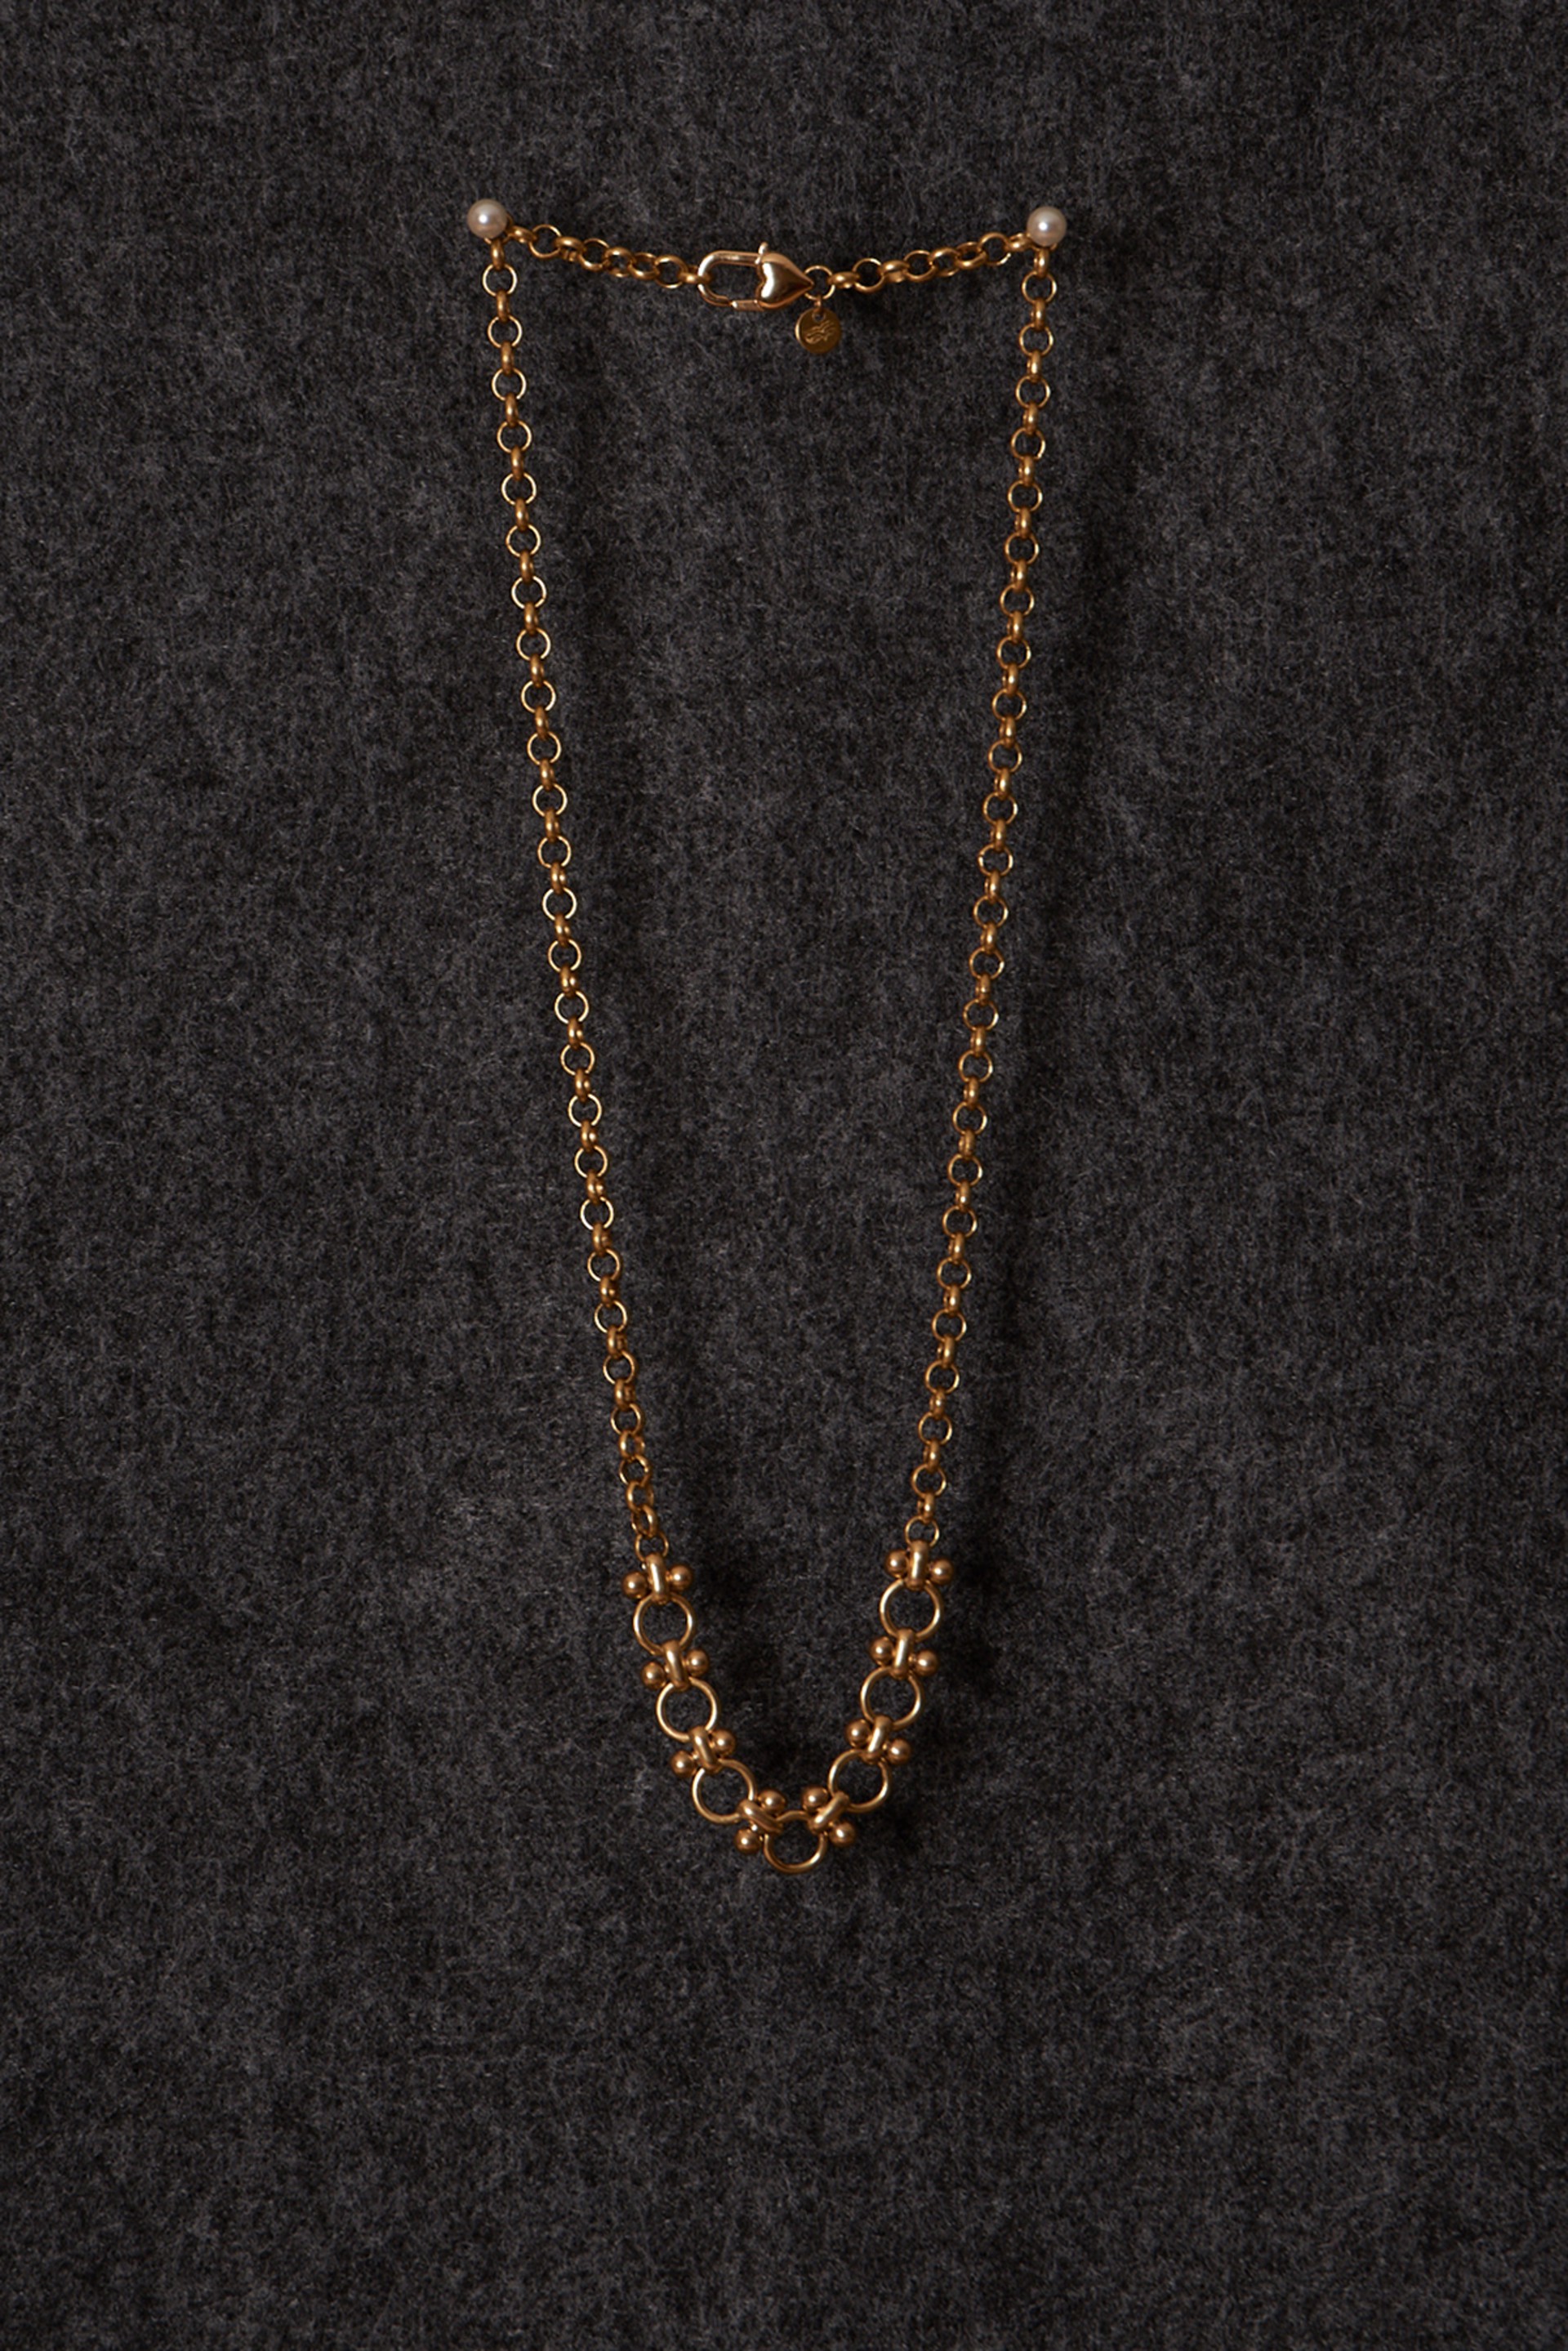 Brass Barbelle Necklace by Cameron Johnson